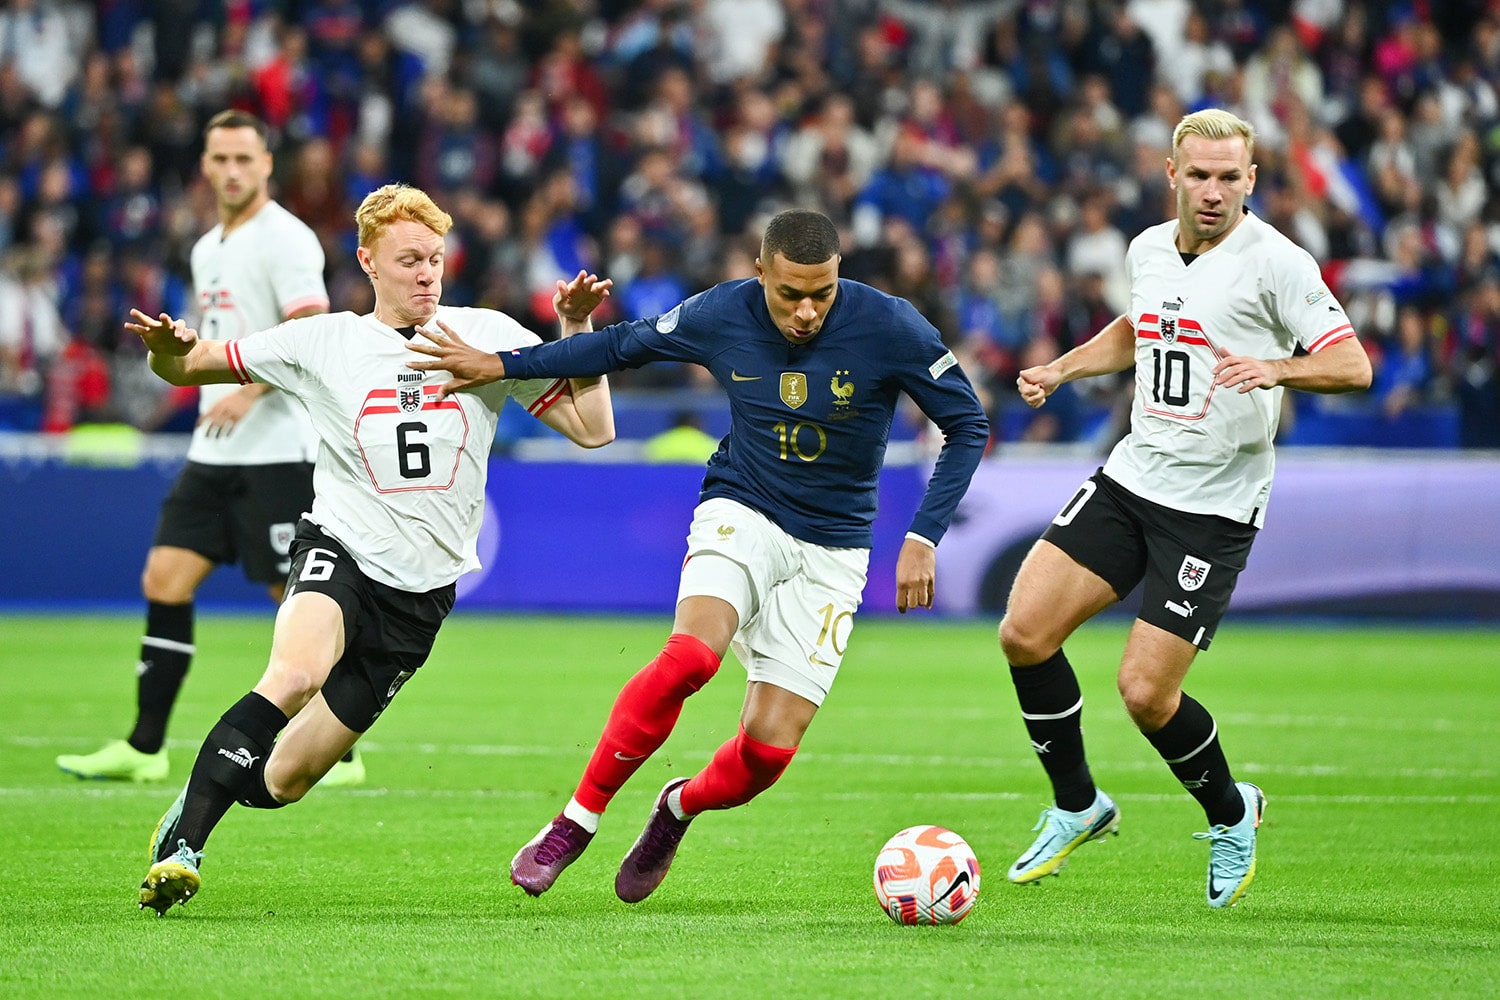 Kylian Mbappe completes dribble during France match against Austria during Nations League match